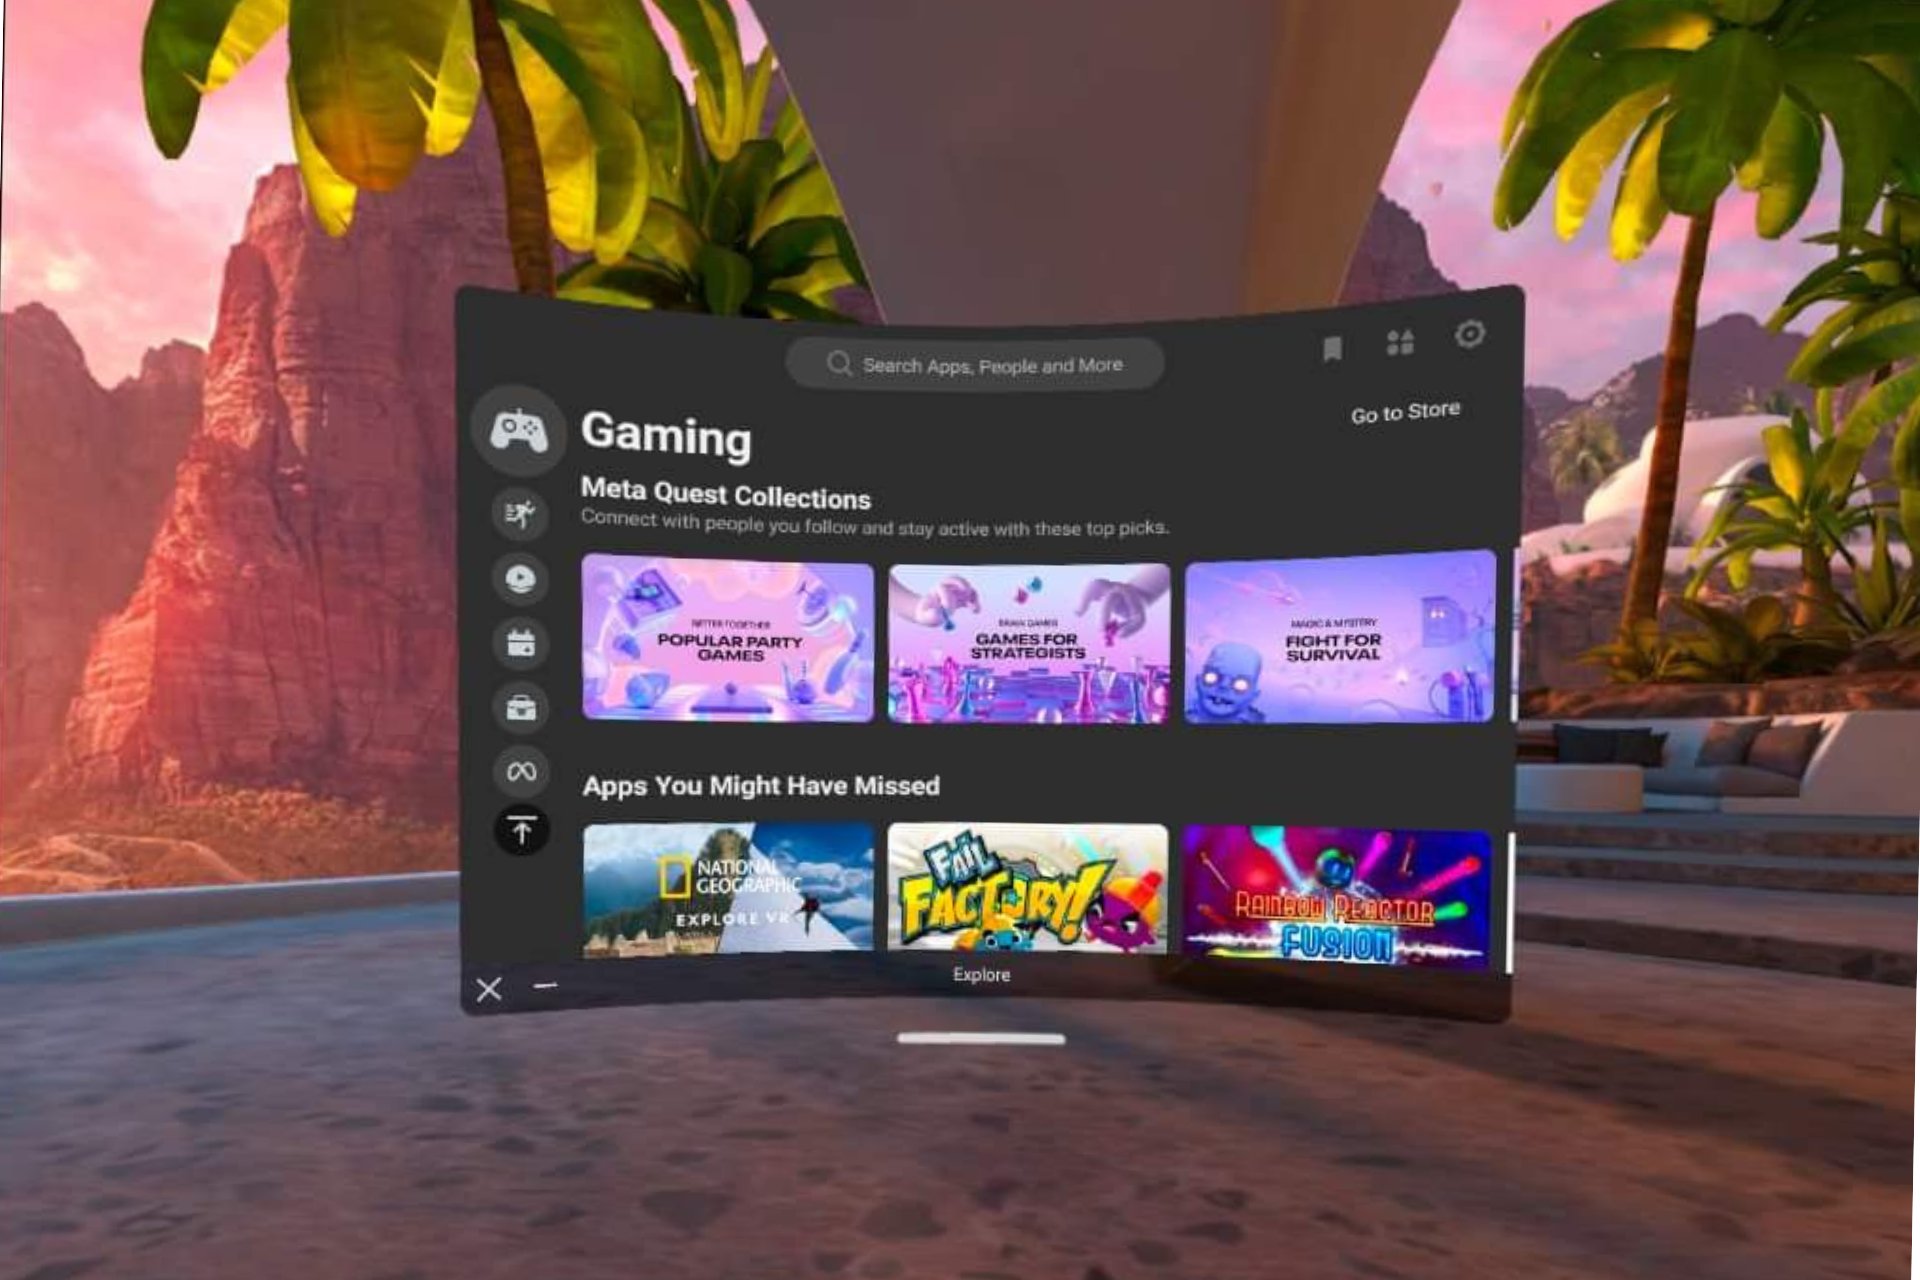 nederlag Plante social Oculus Quest Not Loading Anything: How to Get it Working